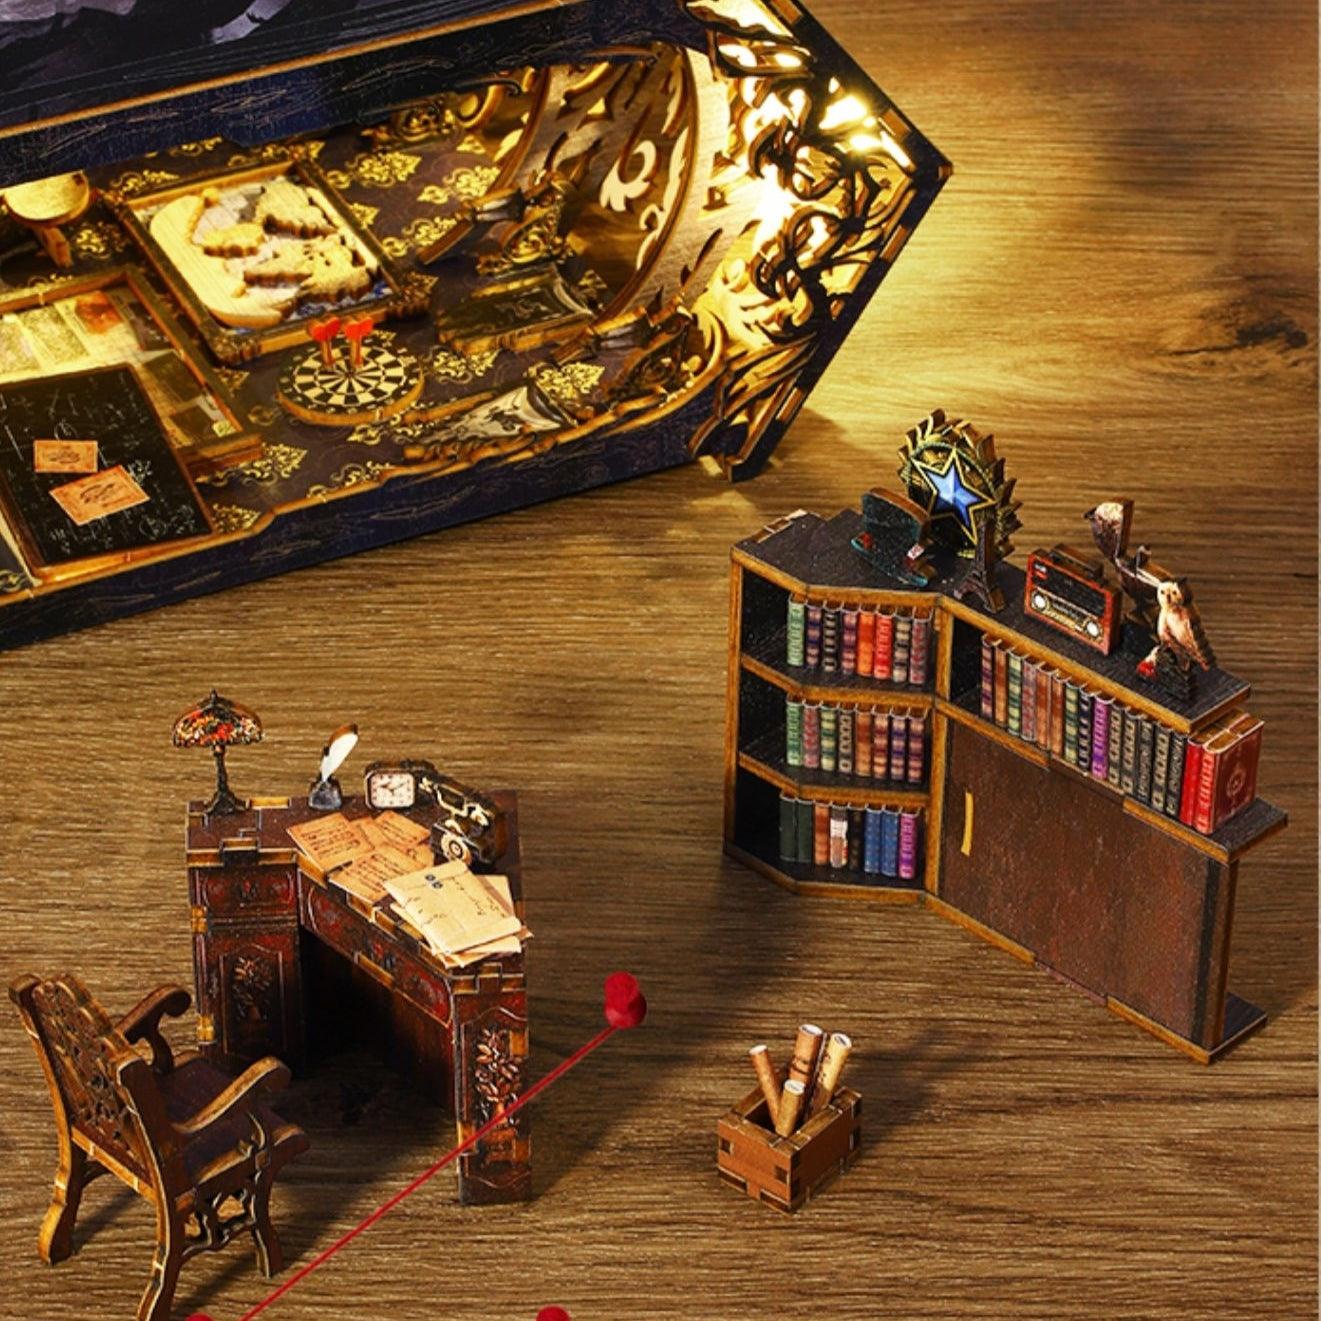 famous detective agency diy book nook kit, inspired by the famous detective Sherlock Holmes, A charming miniature 3d wooden puzzles bring the mysteries of Victorian London to life in authentic miniature scenes, perfect for bookshelf decor, and dollhouse collectors, or a gift for Sherlock Holmes fans.